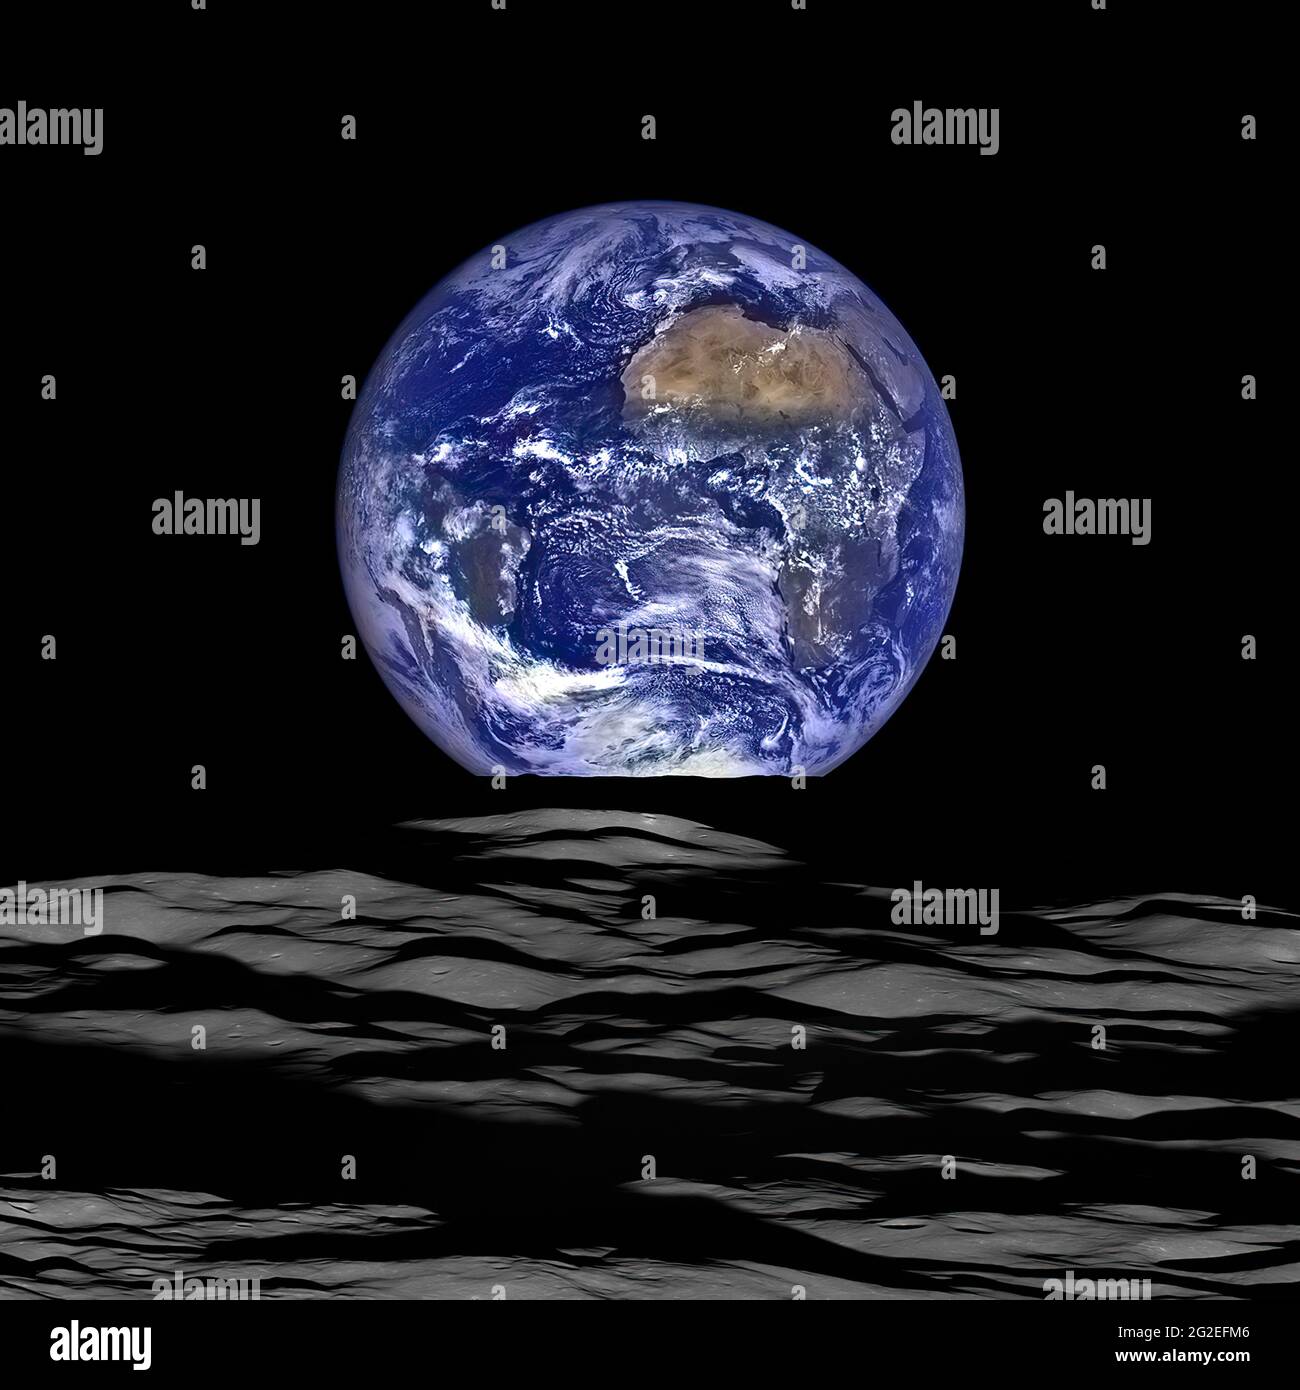 The Earth rises above the lunar horizon in this photograph taken from the moon. Stock Photo